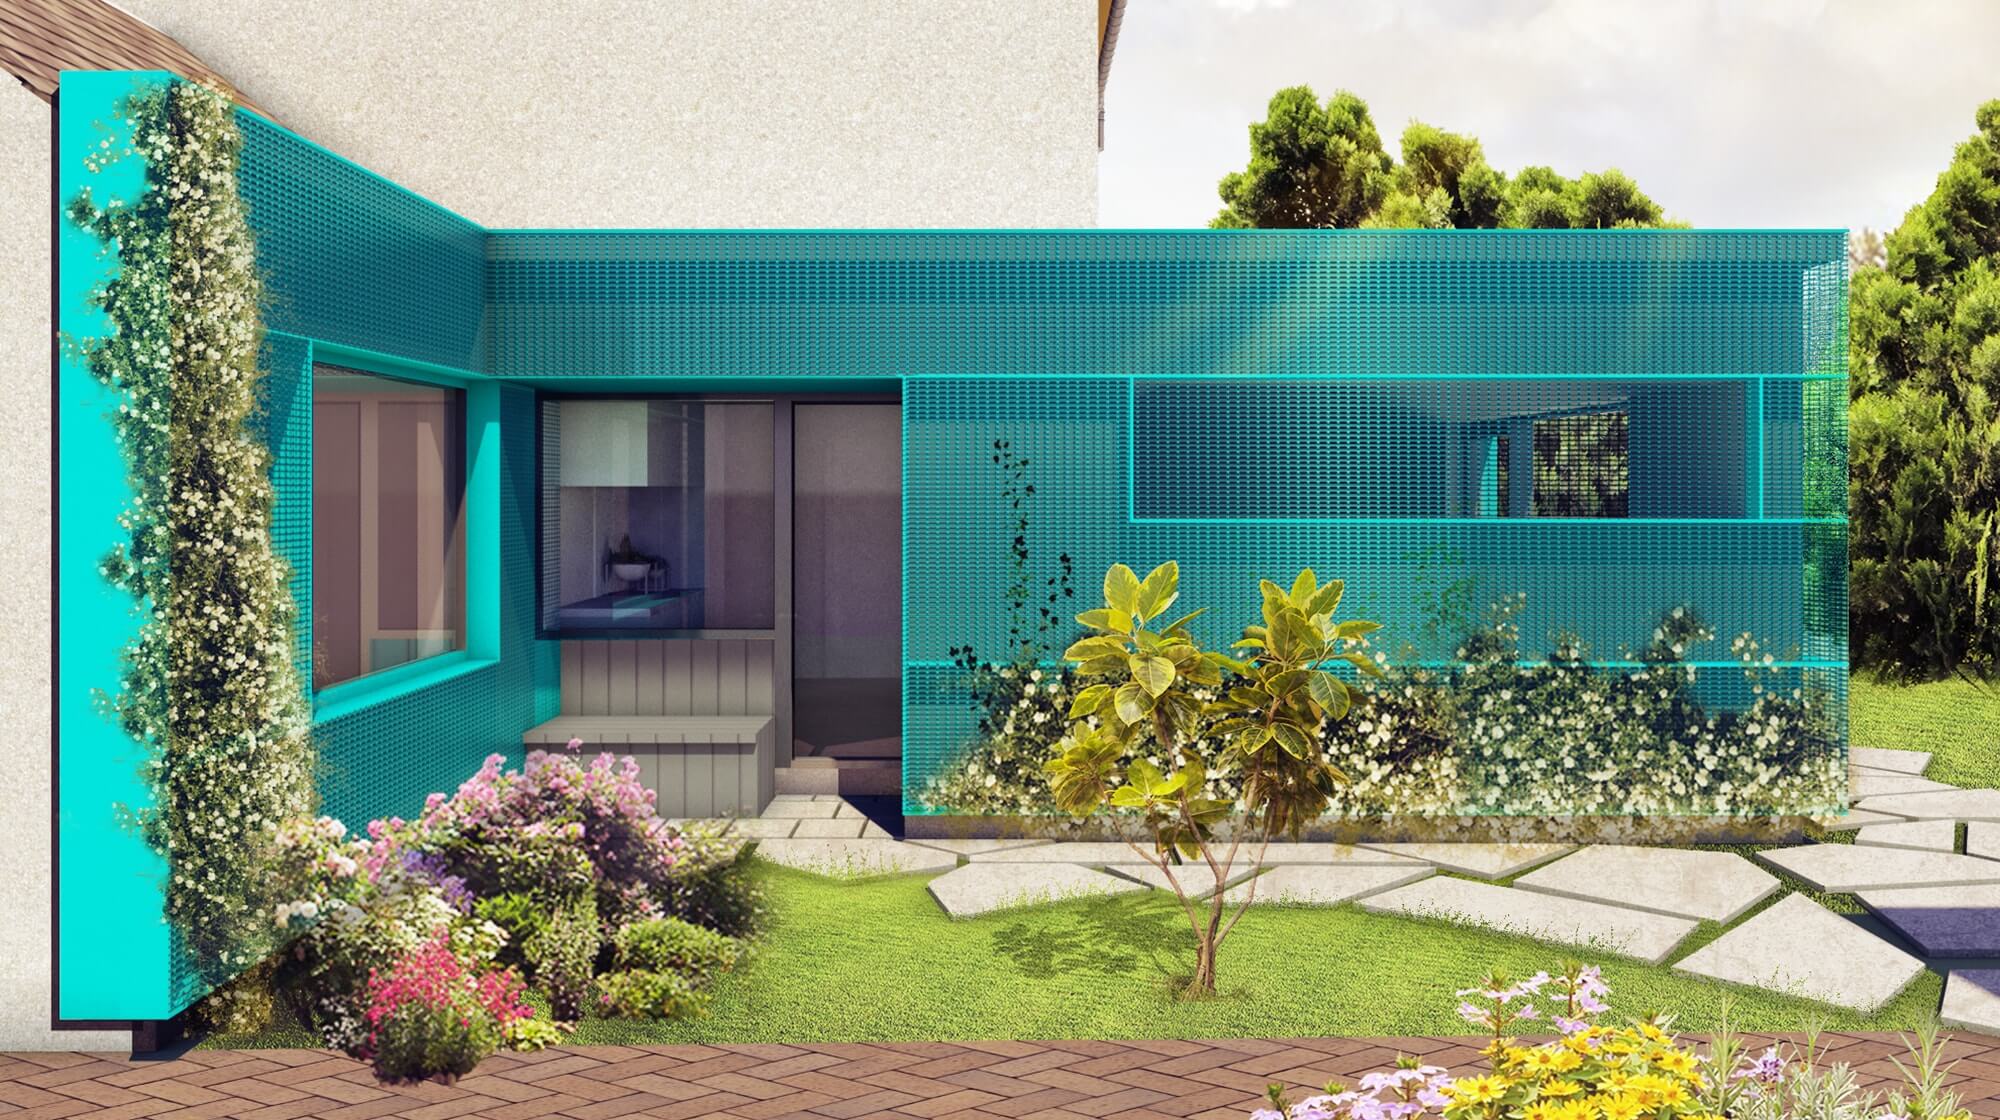 Planning permission for Crammond house extension{categories}, {category_name}{/categories}